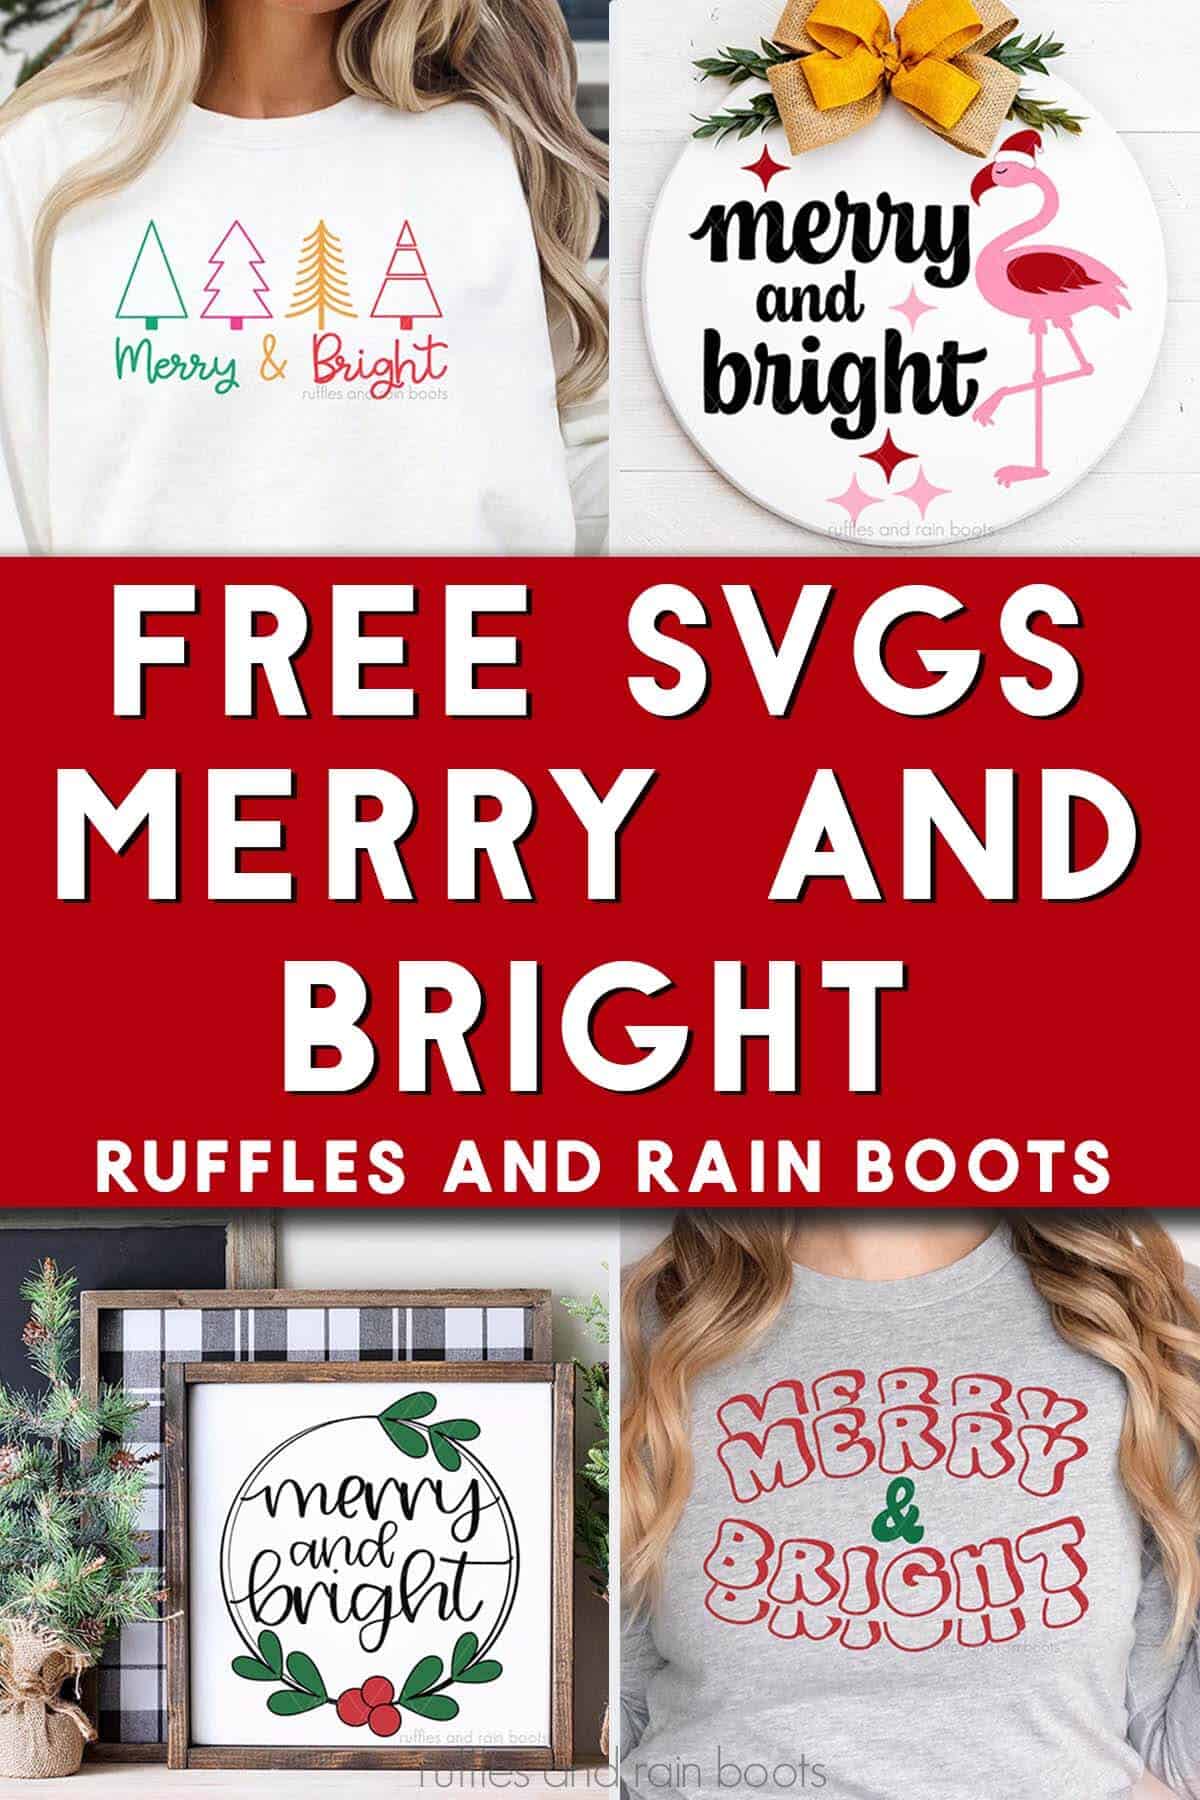 Vertical four image collage of t-shirts and signs made for Christmas with text which reads free SVGs merry and bright.